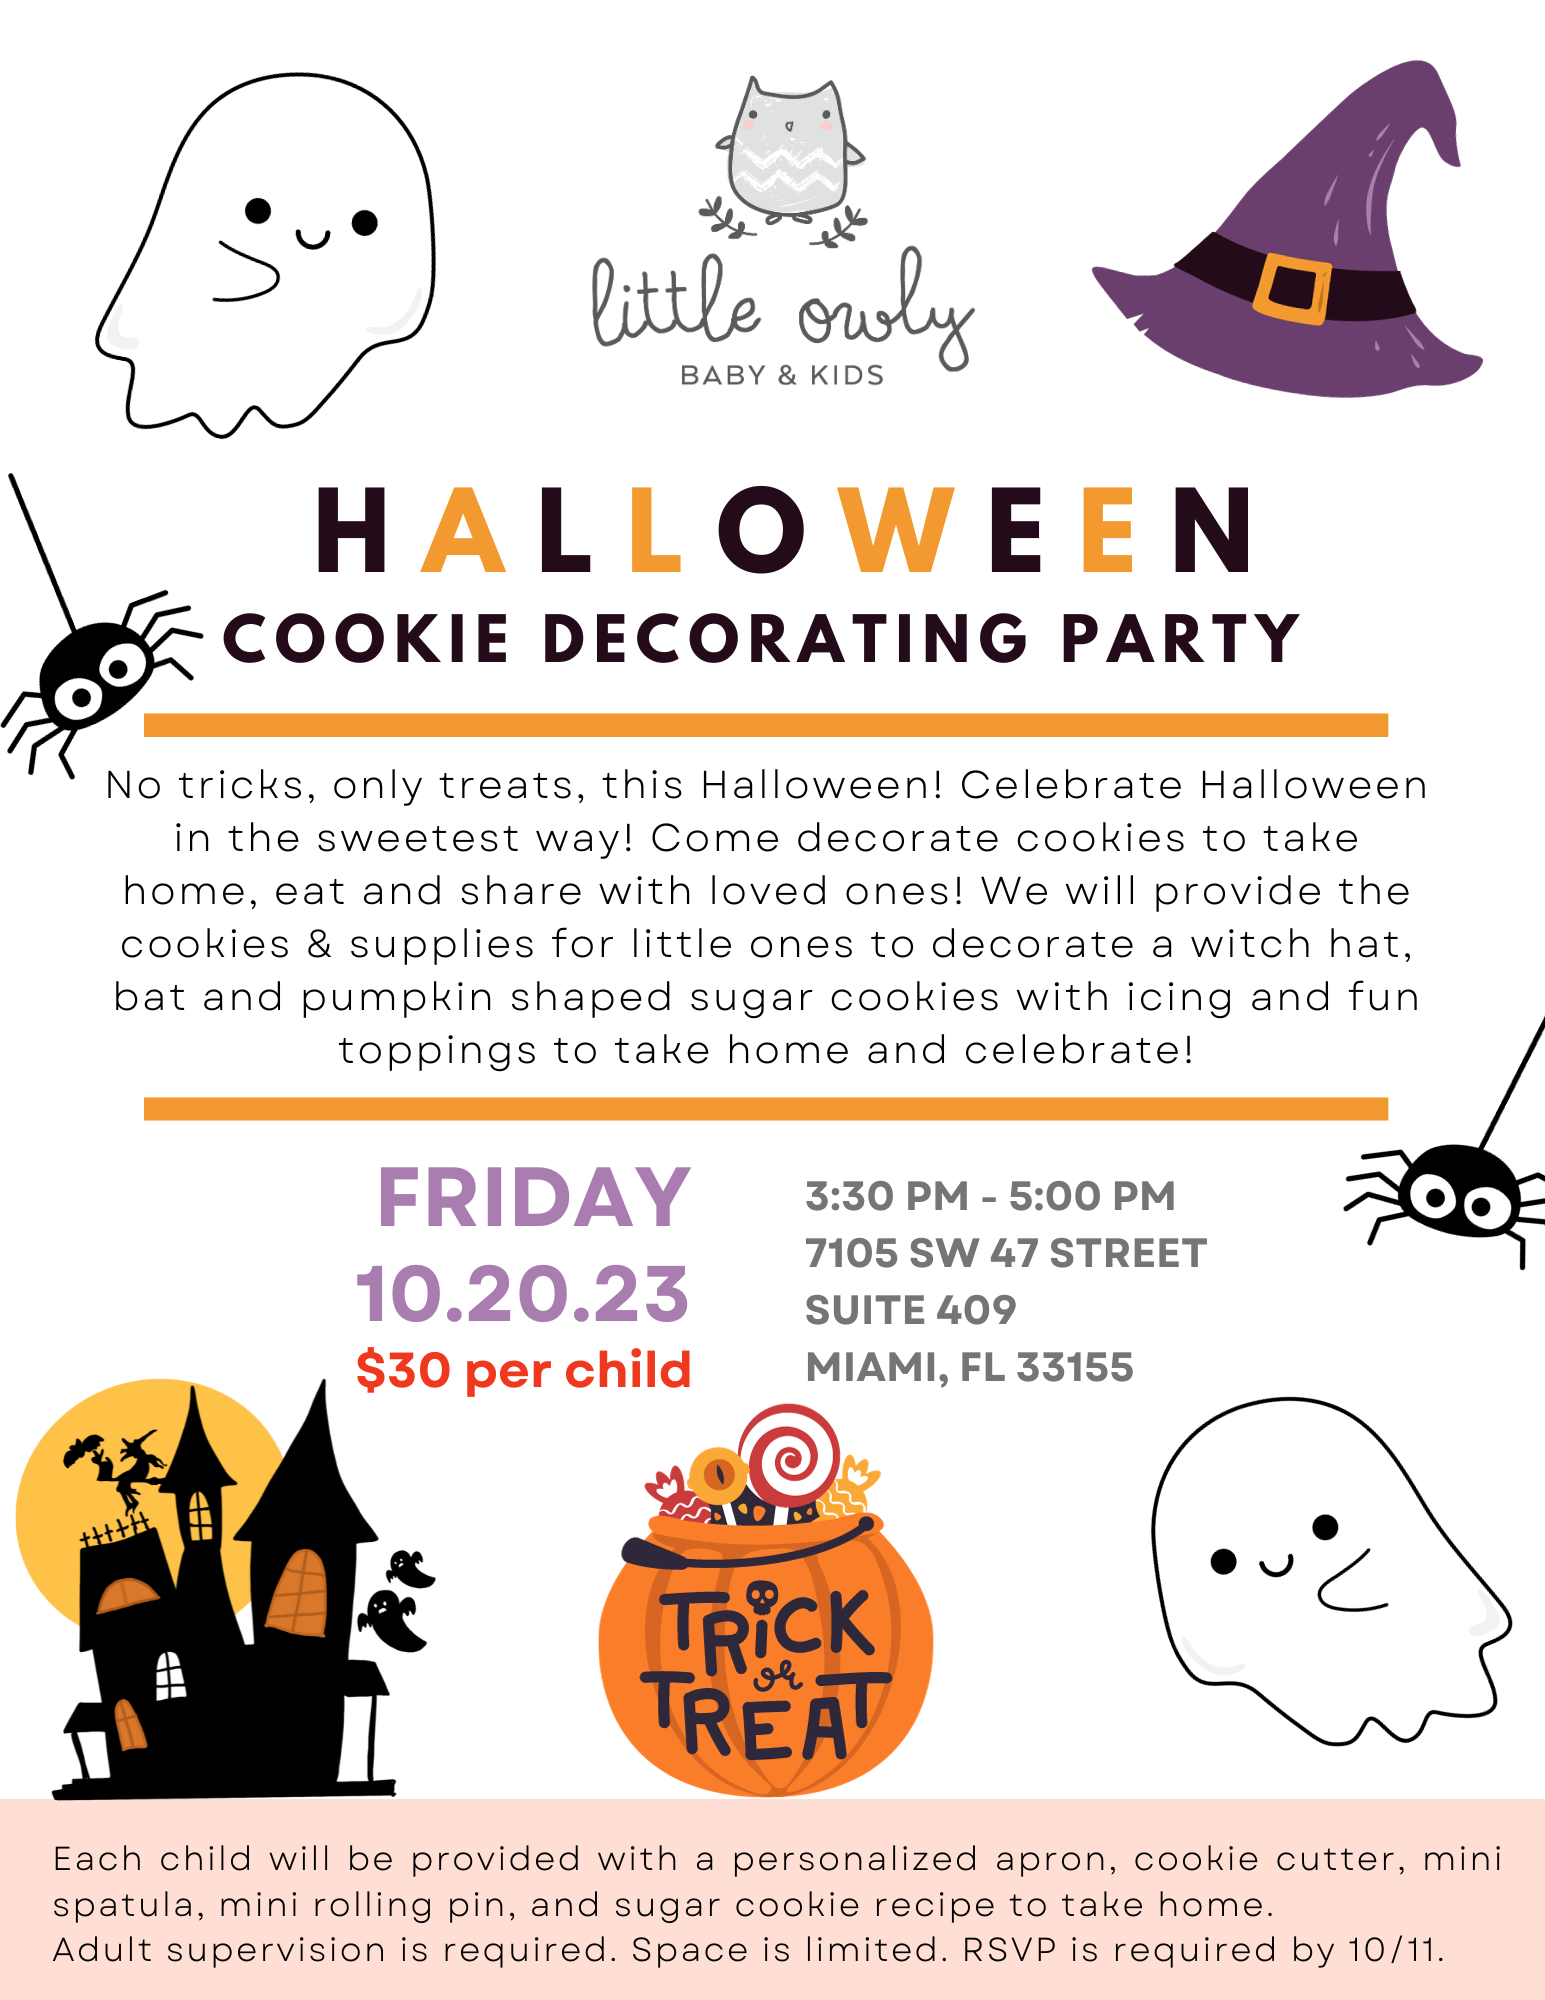 Halloween Cookie Decorating Party - Private Event